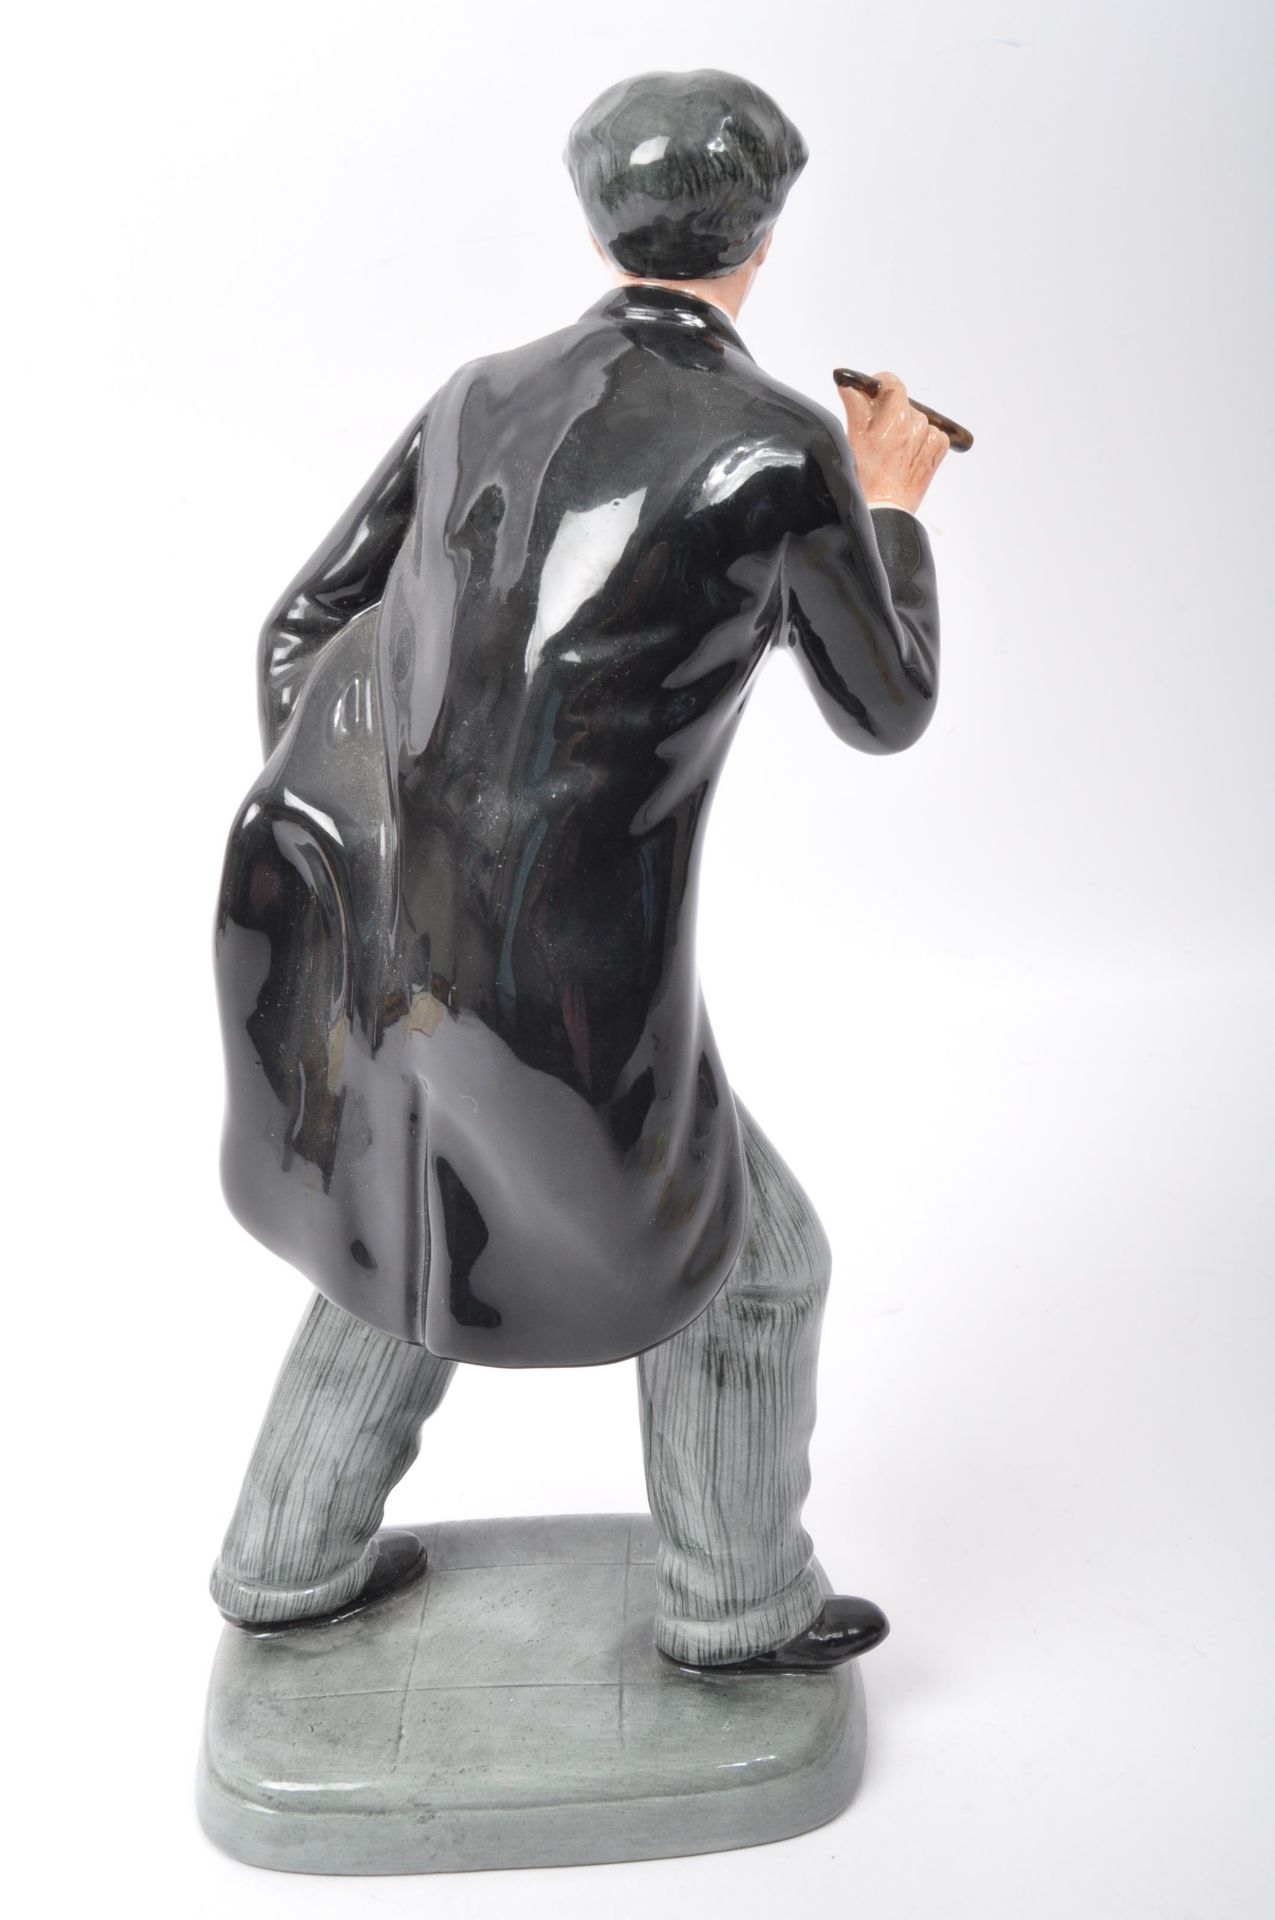 ROYAL DOULTON LIMITED EDITION GROUCHO MARX FIGURE - Image 4 of 6